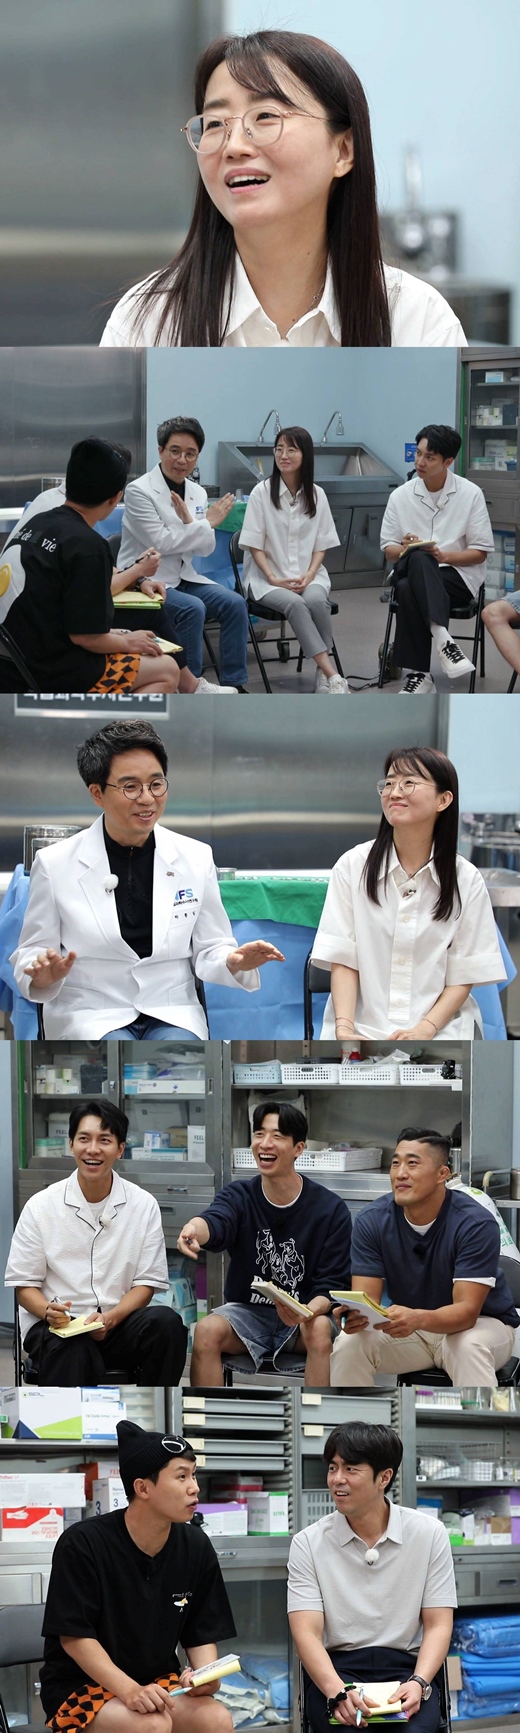 Kim Eun-hee, the master of the Genre Animals drama, will appear on SBS All The Butlers as masters and present the One Day class.On SBS All The Butlers, which airs at 6:30 pm on the 5th (Sun), members are pictured as a daily writer team of Master Kim Eun-hee and being handed down the top class of Korea, How to Write Good.At the recent shooting site, Kim Eun-hee presented his own creative know-how, such as Teed lightly and buttocks heavy to the members, and suggested that the traditional fairy tale be adapted into the Kim Eun-hee table Genre Animals as the final task.Kim Eun-hee made an extraordinary offer to give a special gift to the best member and burned the morale of the members.Amid all kinds of speculation about gifts such as drama appearance rights and Kingdom script book, the scene was a mess with the explosive reaction of the members when Kim Eun-hee revealed the identity of the gift.It raises the question of what was the first gift that caused the hot reaction.In addition, members were given a limited opportunity to get a glimpse of the birth secret of Kim Eun-hee writer table Genre Animals.Kim Eun-hee is a real model of Park Shin-yang, the main character of the drama Sign, the terrestrial debut of the artist, and met with the forensic officer of the National Institute of Scientific Investigation, Ha Hong-il, who has inspired Kim Eun-hees Genre Animals through various consultations.Kim Eun-hee expressed his gratitude to the reunion for a long time, and he revealed the story that he had trouble covering the past story.The members also began to immerse themselves in the coverage of Kim Eun-hee for the perfect Genre Animals adaptation.But I was frustrated with the coverage that is not easier than I thought.In particular, Yang said, Imagination is declining, and showed sympathy for Kim Eun-hees coverage.Whether the members will be able to complete the task of the master safely, and the members who have transformed into daily writers can be seen on SBS All The Butlers which is broadcasted at 6:30 pm on the 5th (Sunday).